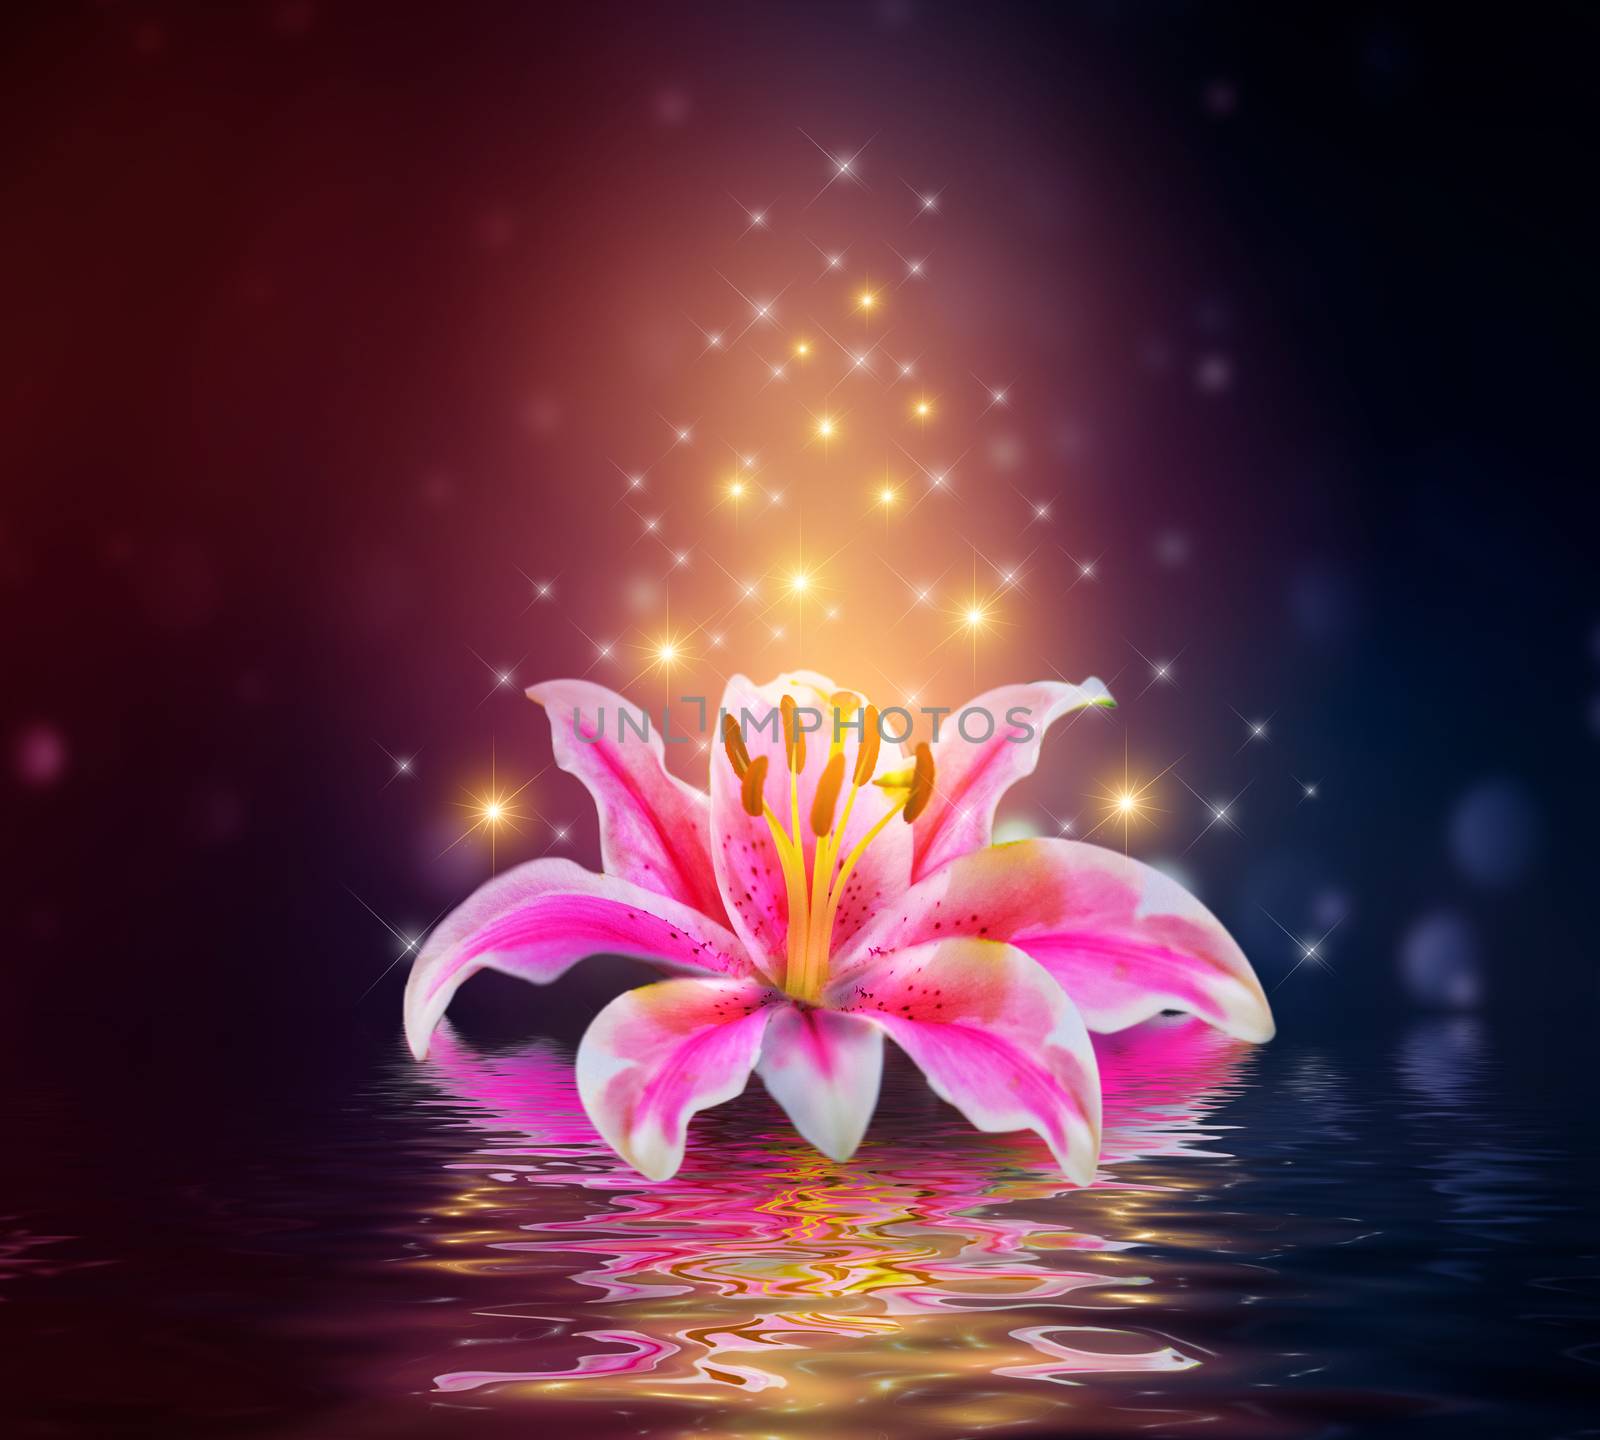 Pink Lilies flower on water reflection